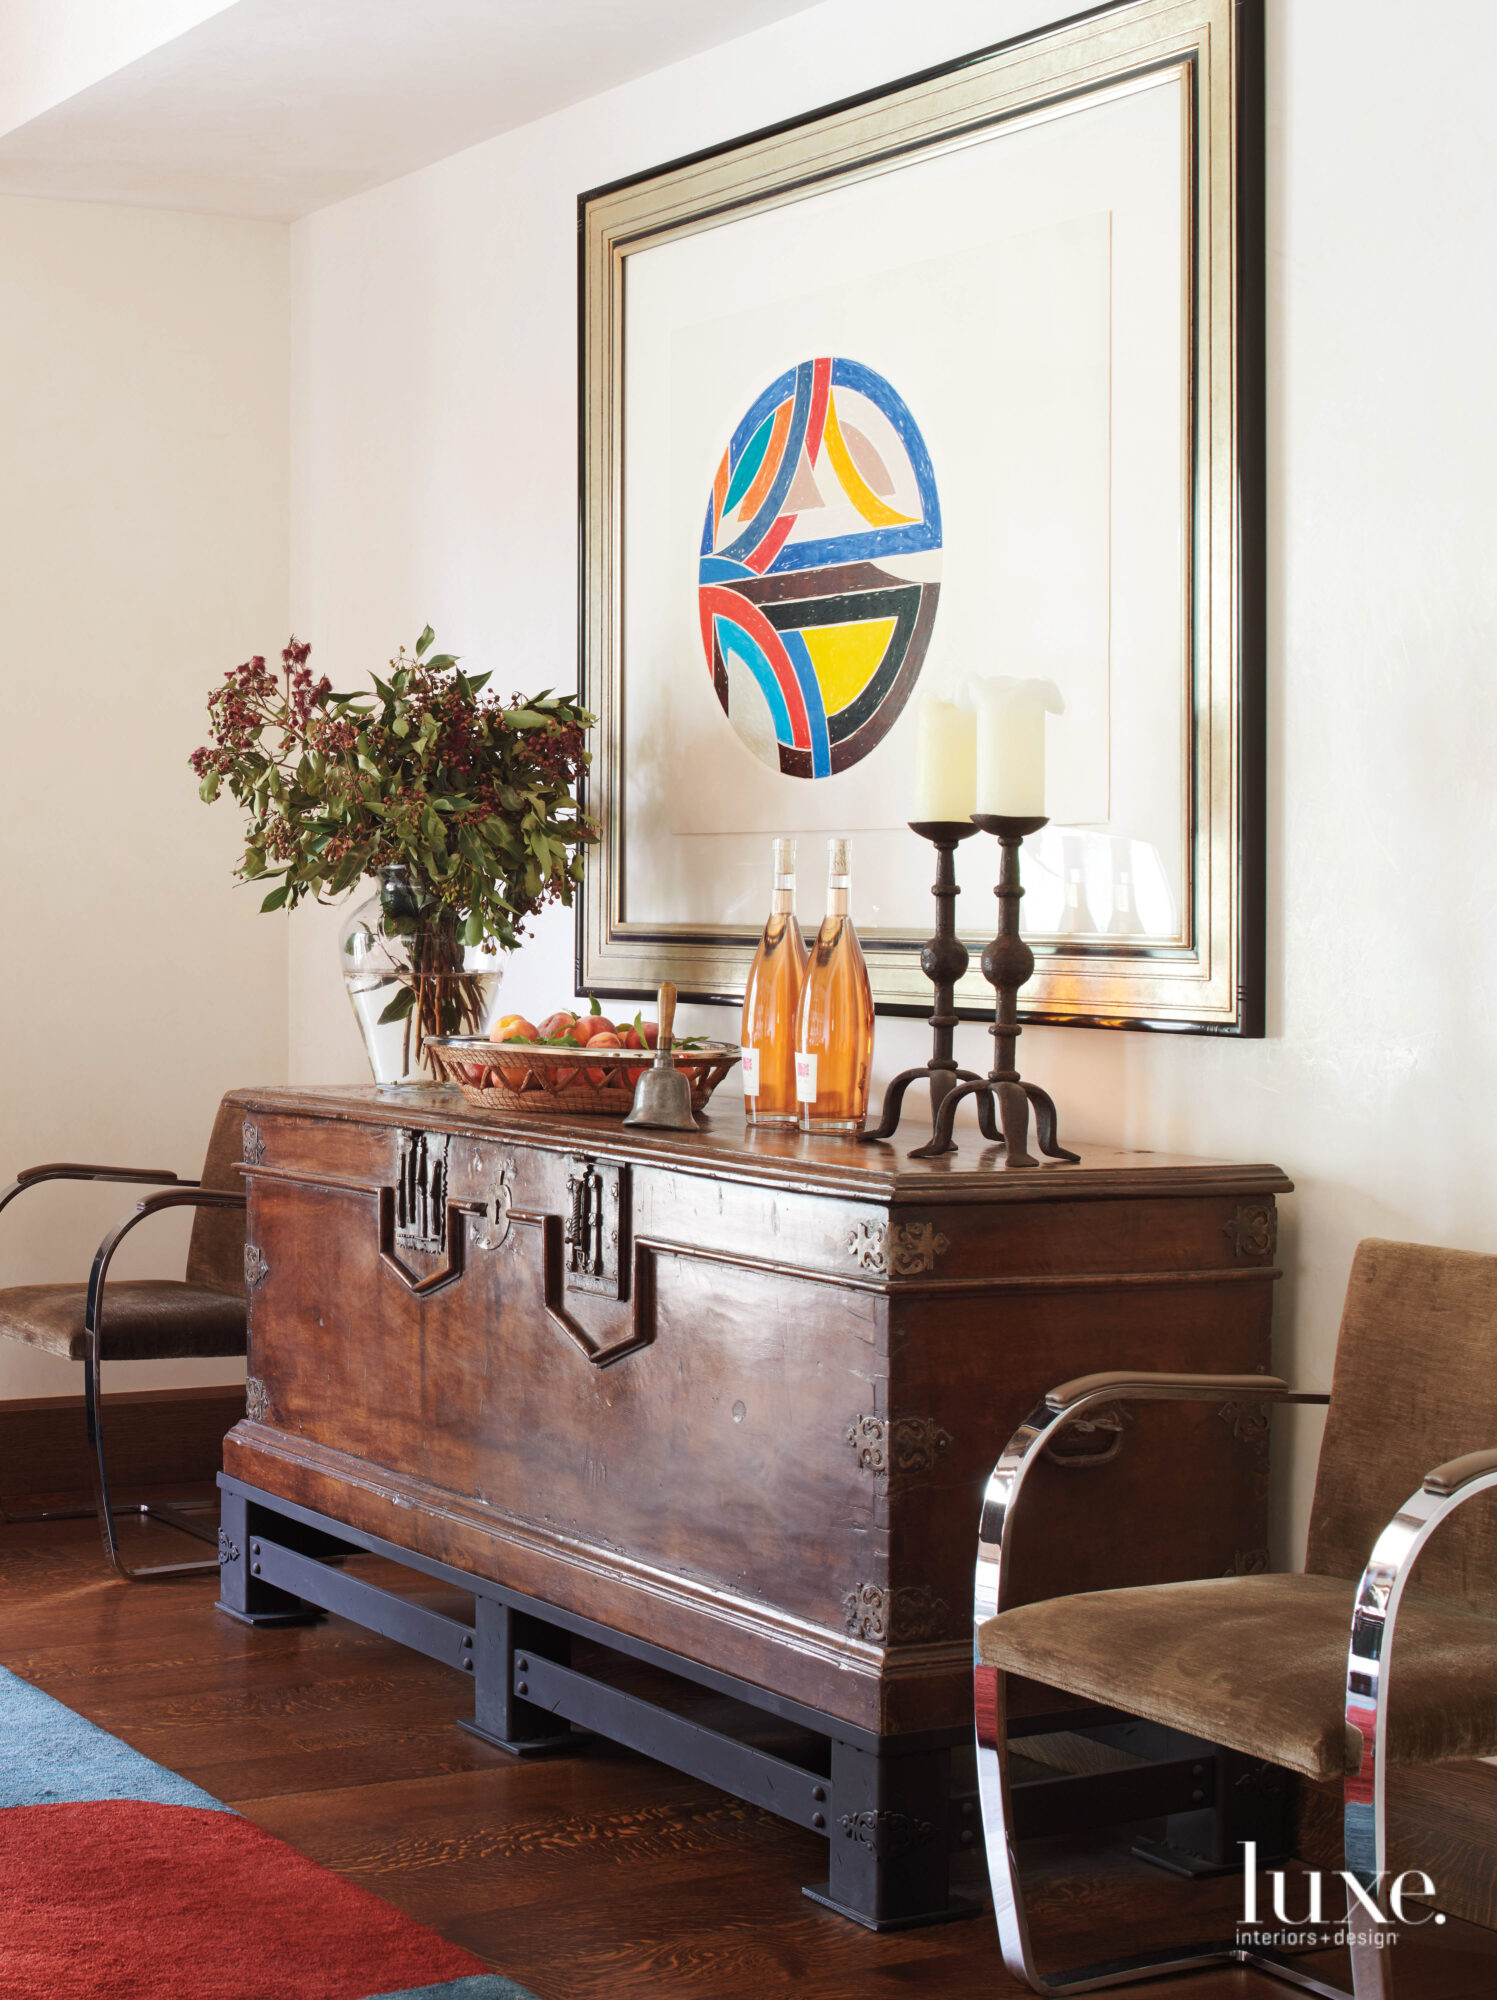 A dining room features an antique chest and modern art at one end of the room.